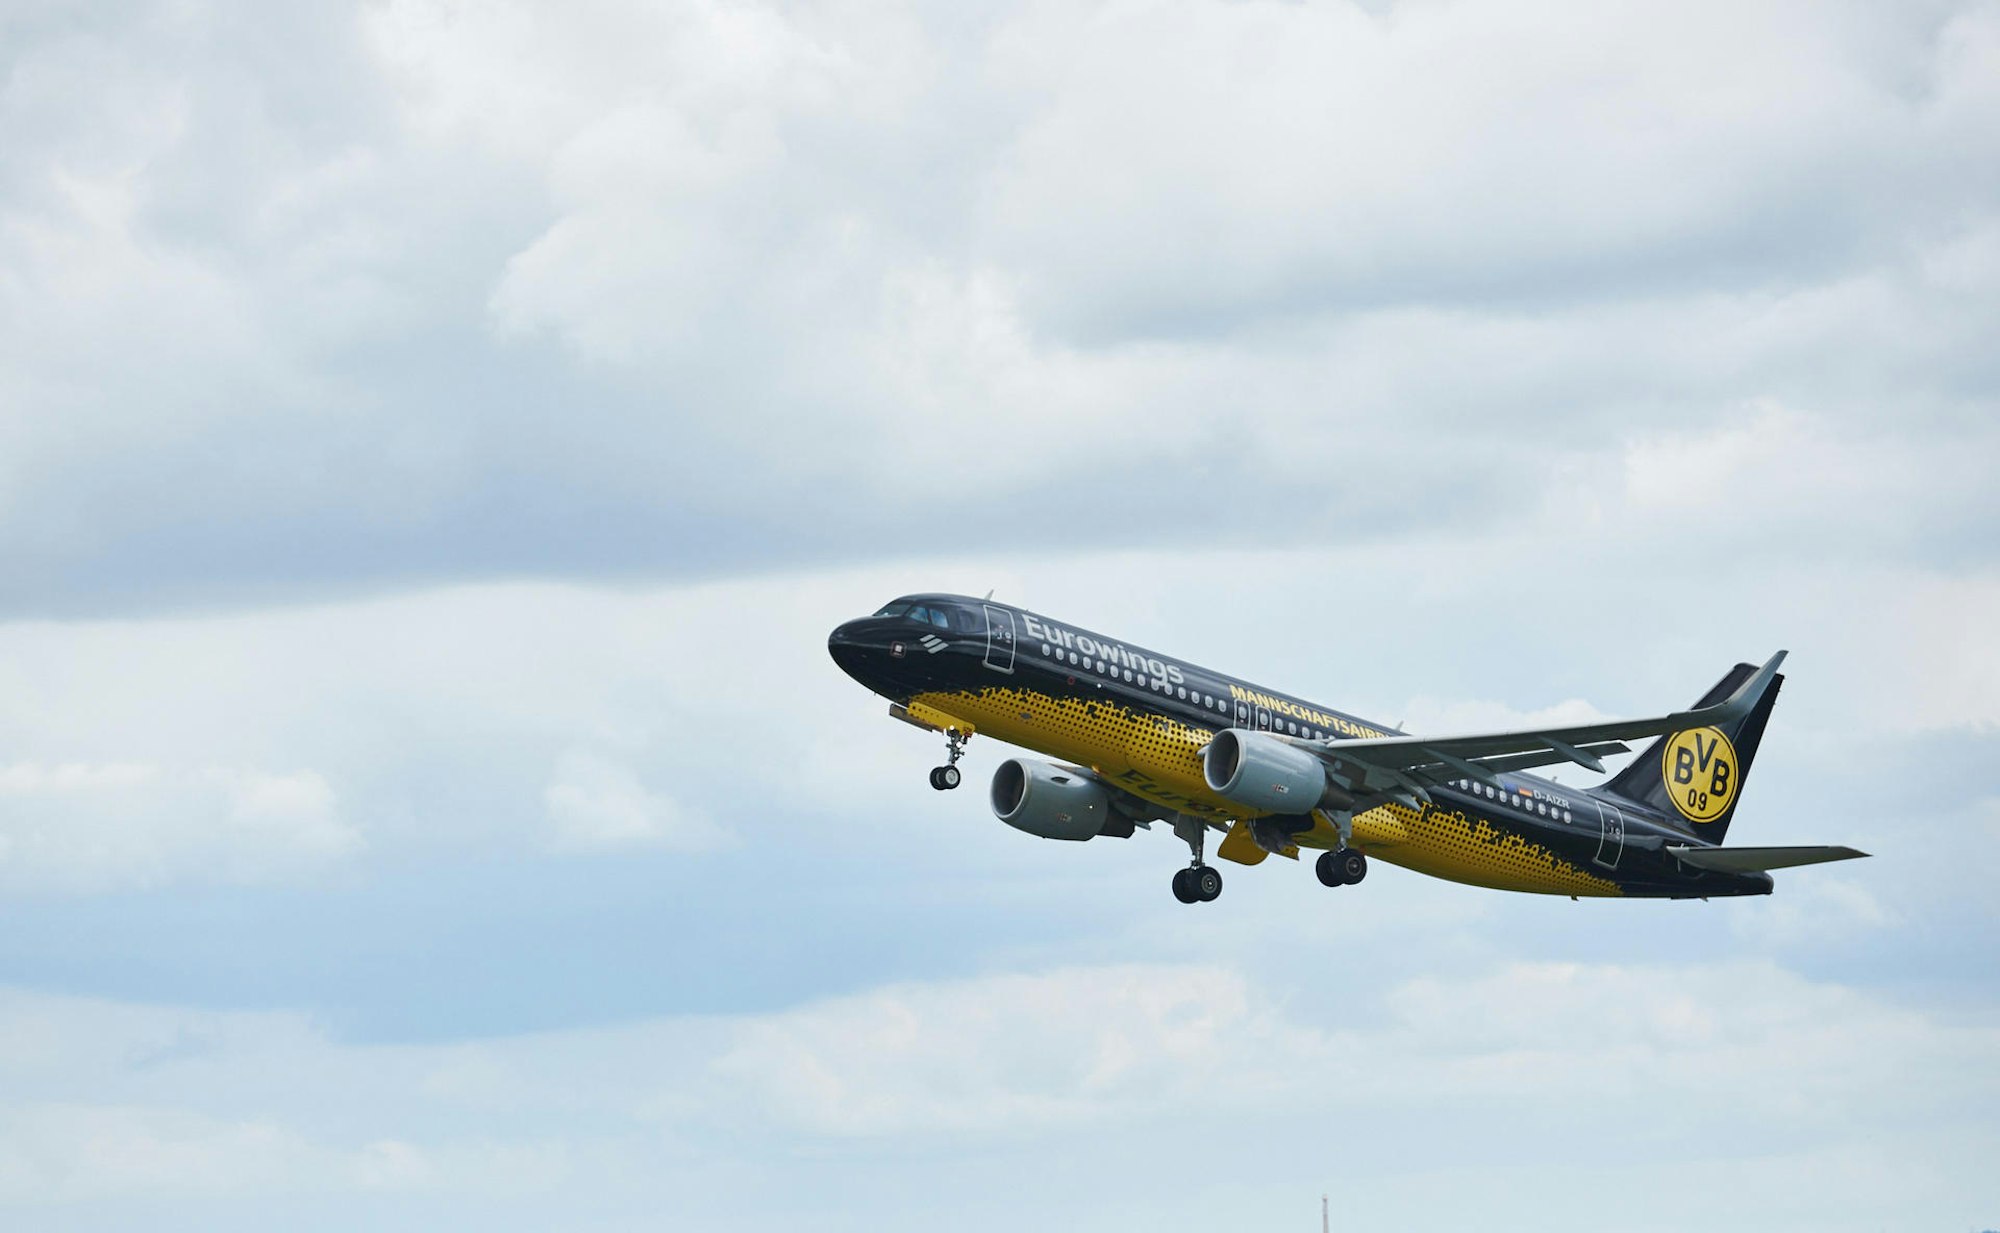 B_Eurowings_BVB_A320 with BVB Livery_ Departure